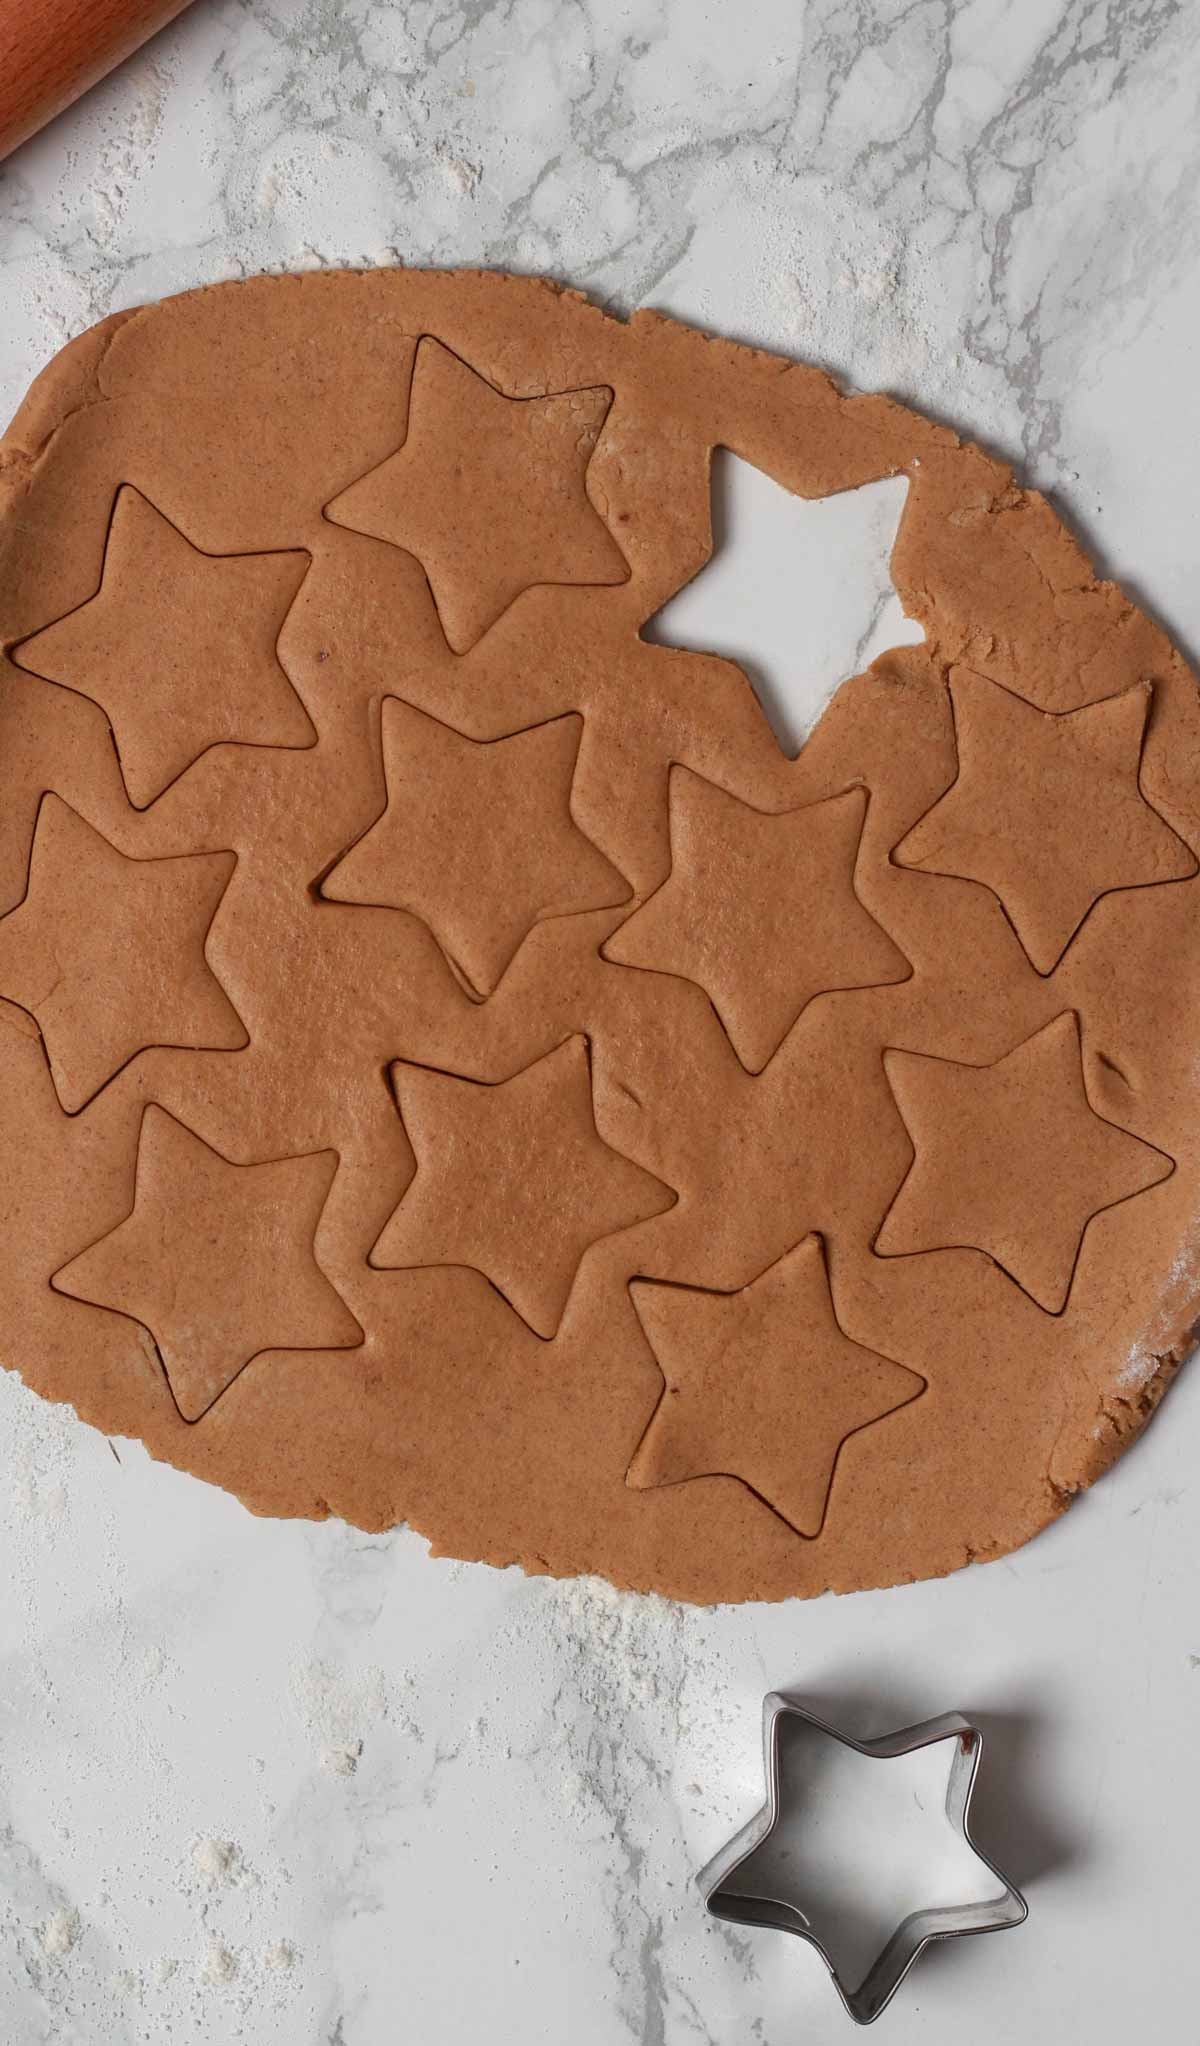 Cutting Star Shapes Out Of The Rolled Dough